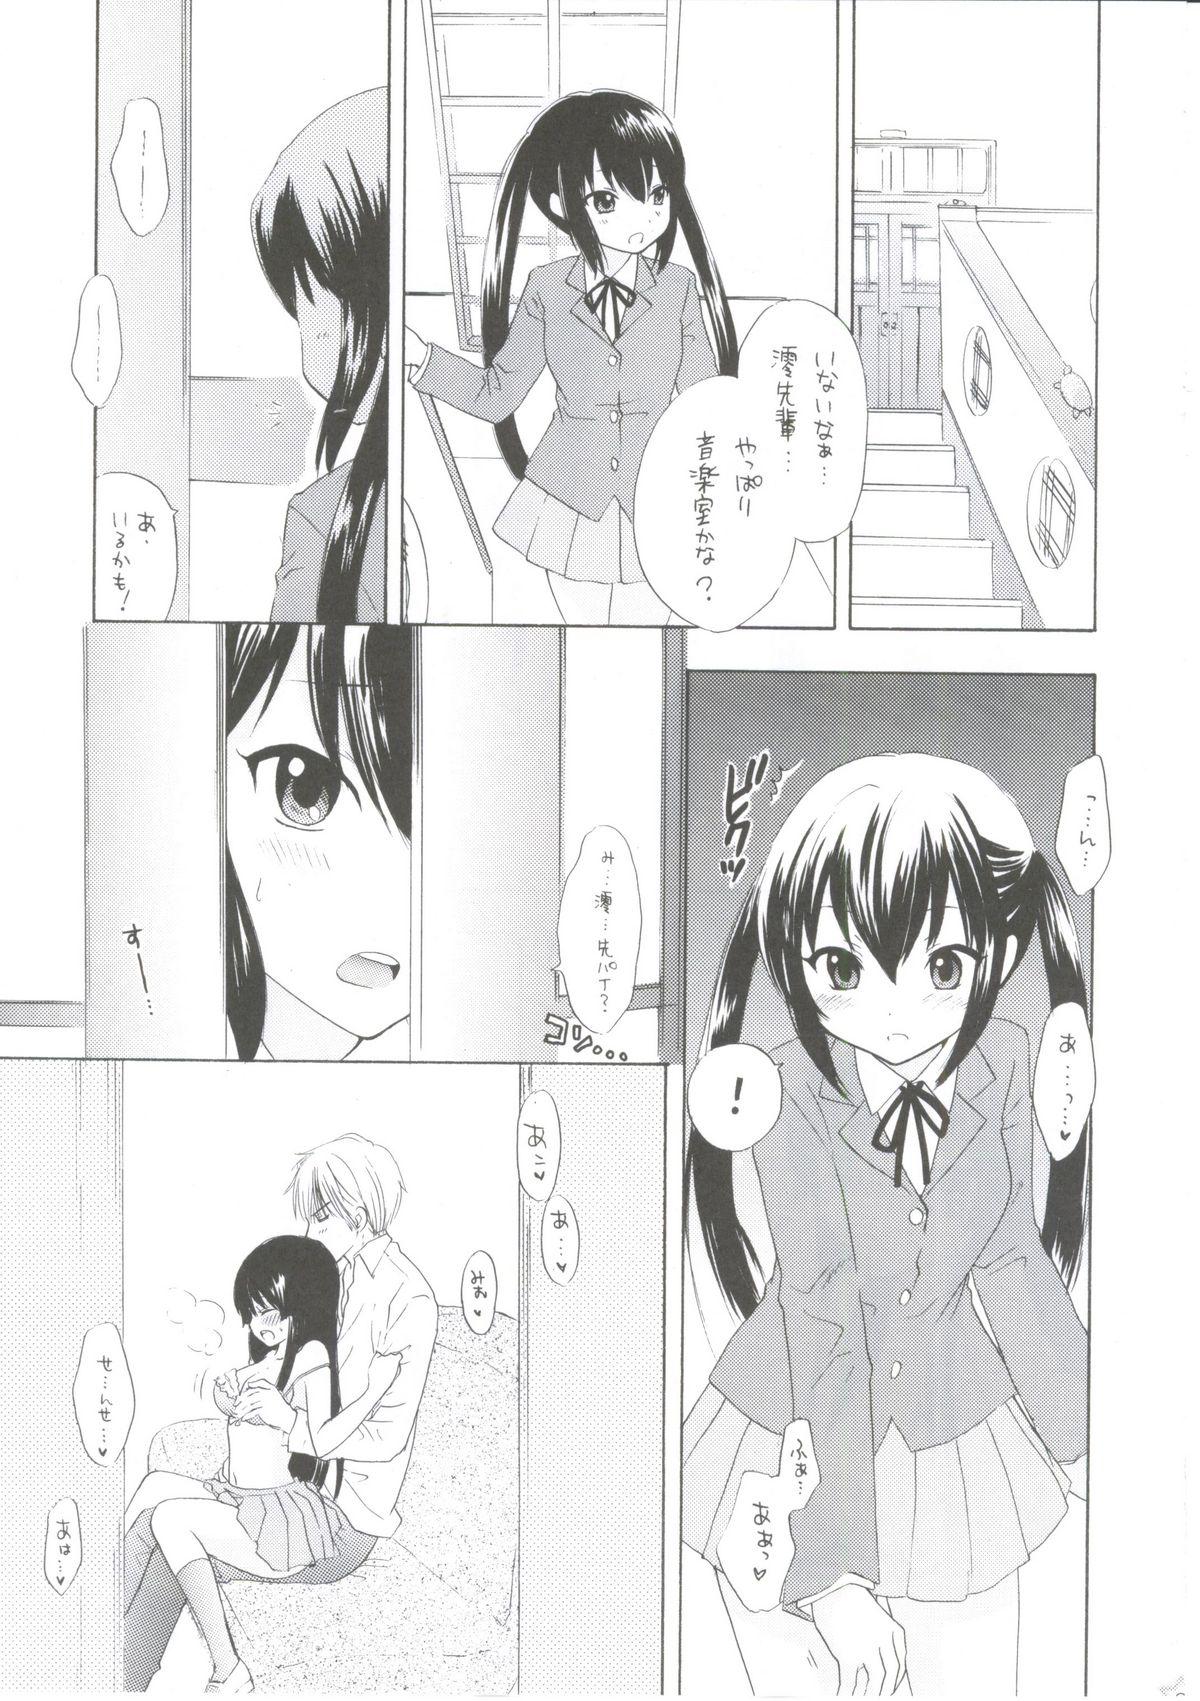 Italiano 1,2,3 for 5!! - K-on Trio - Page 6